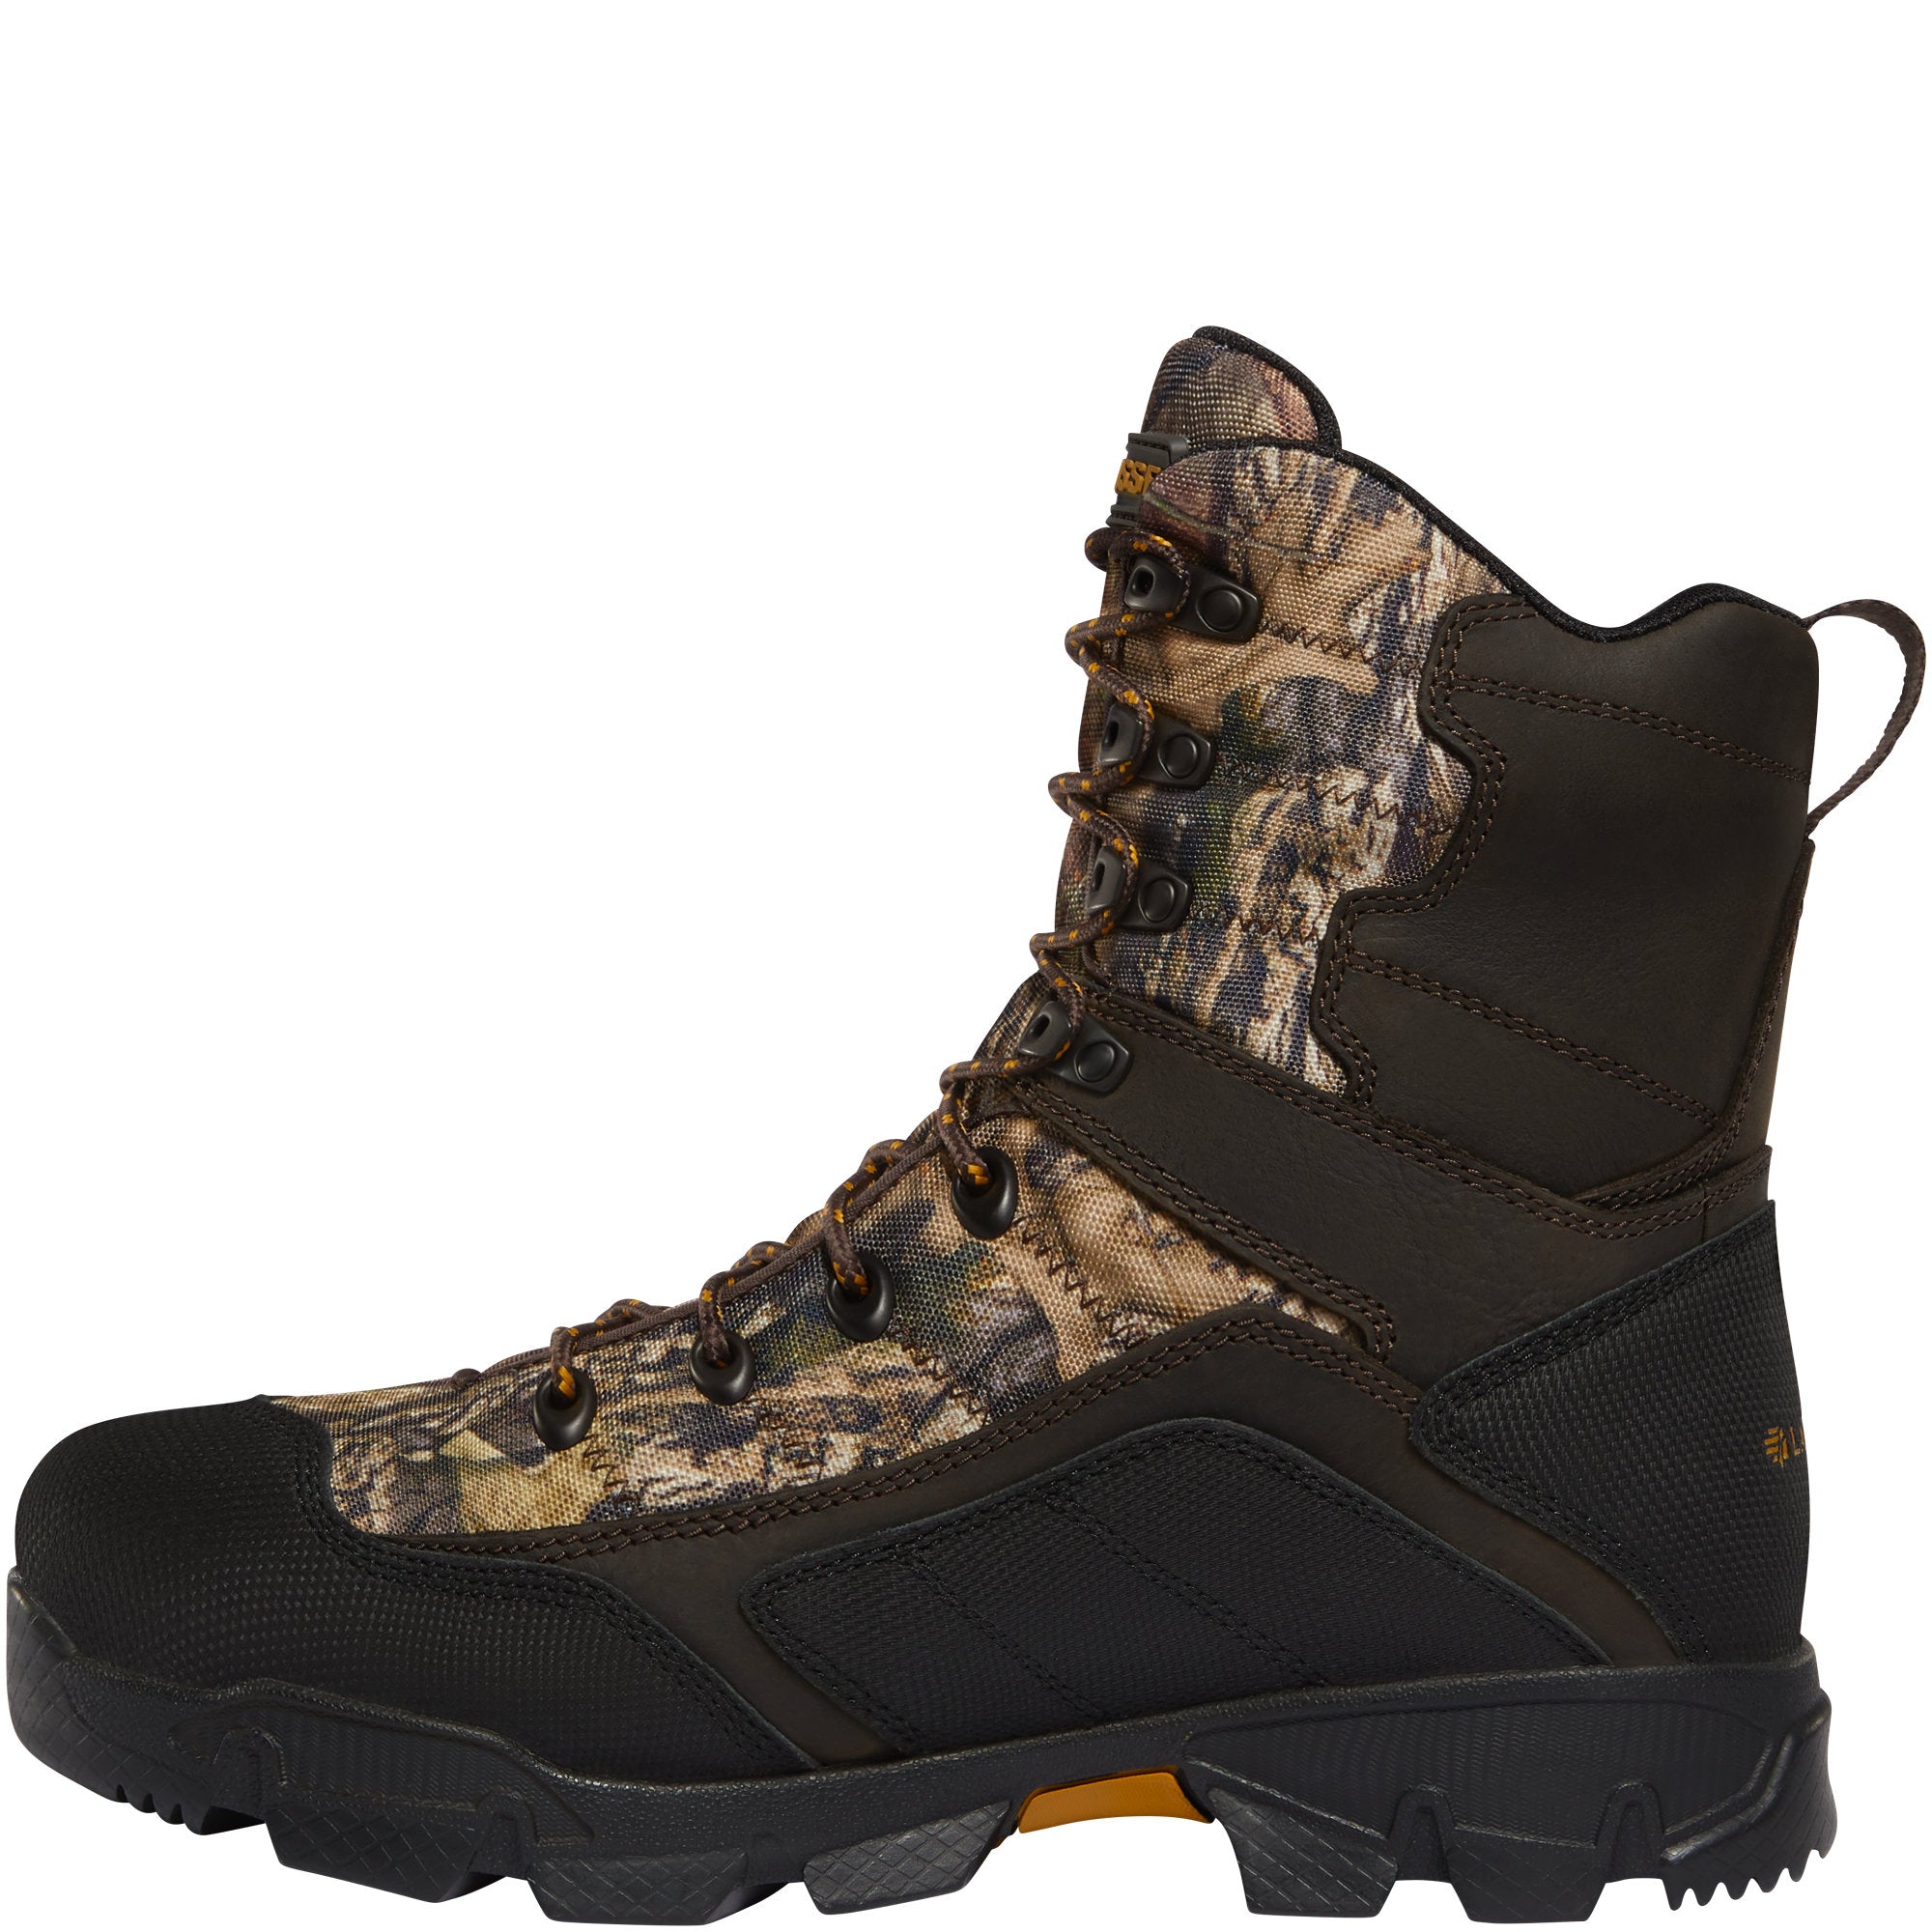 LaCrosse Cold Snap 9" Waterproof / Insulated - Mens